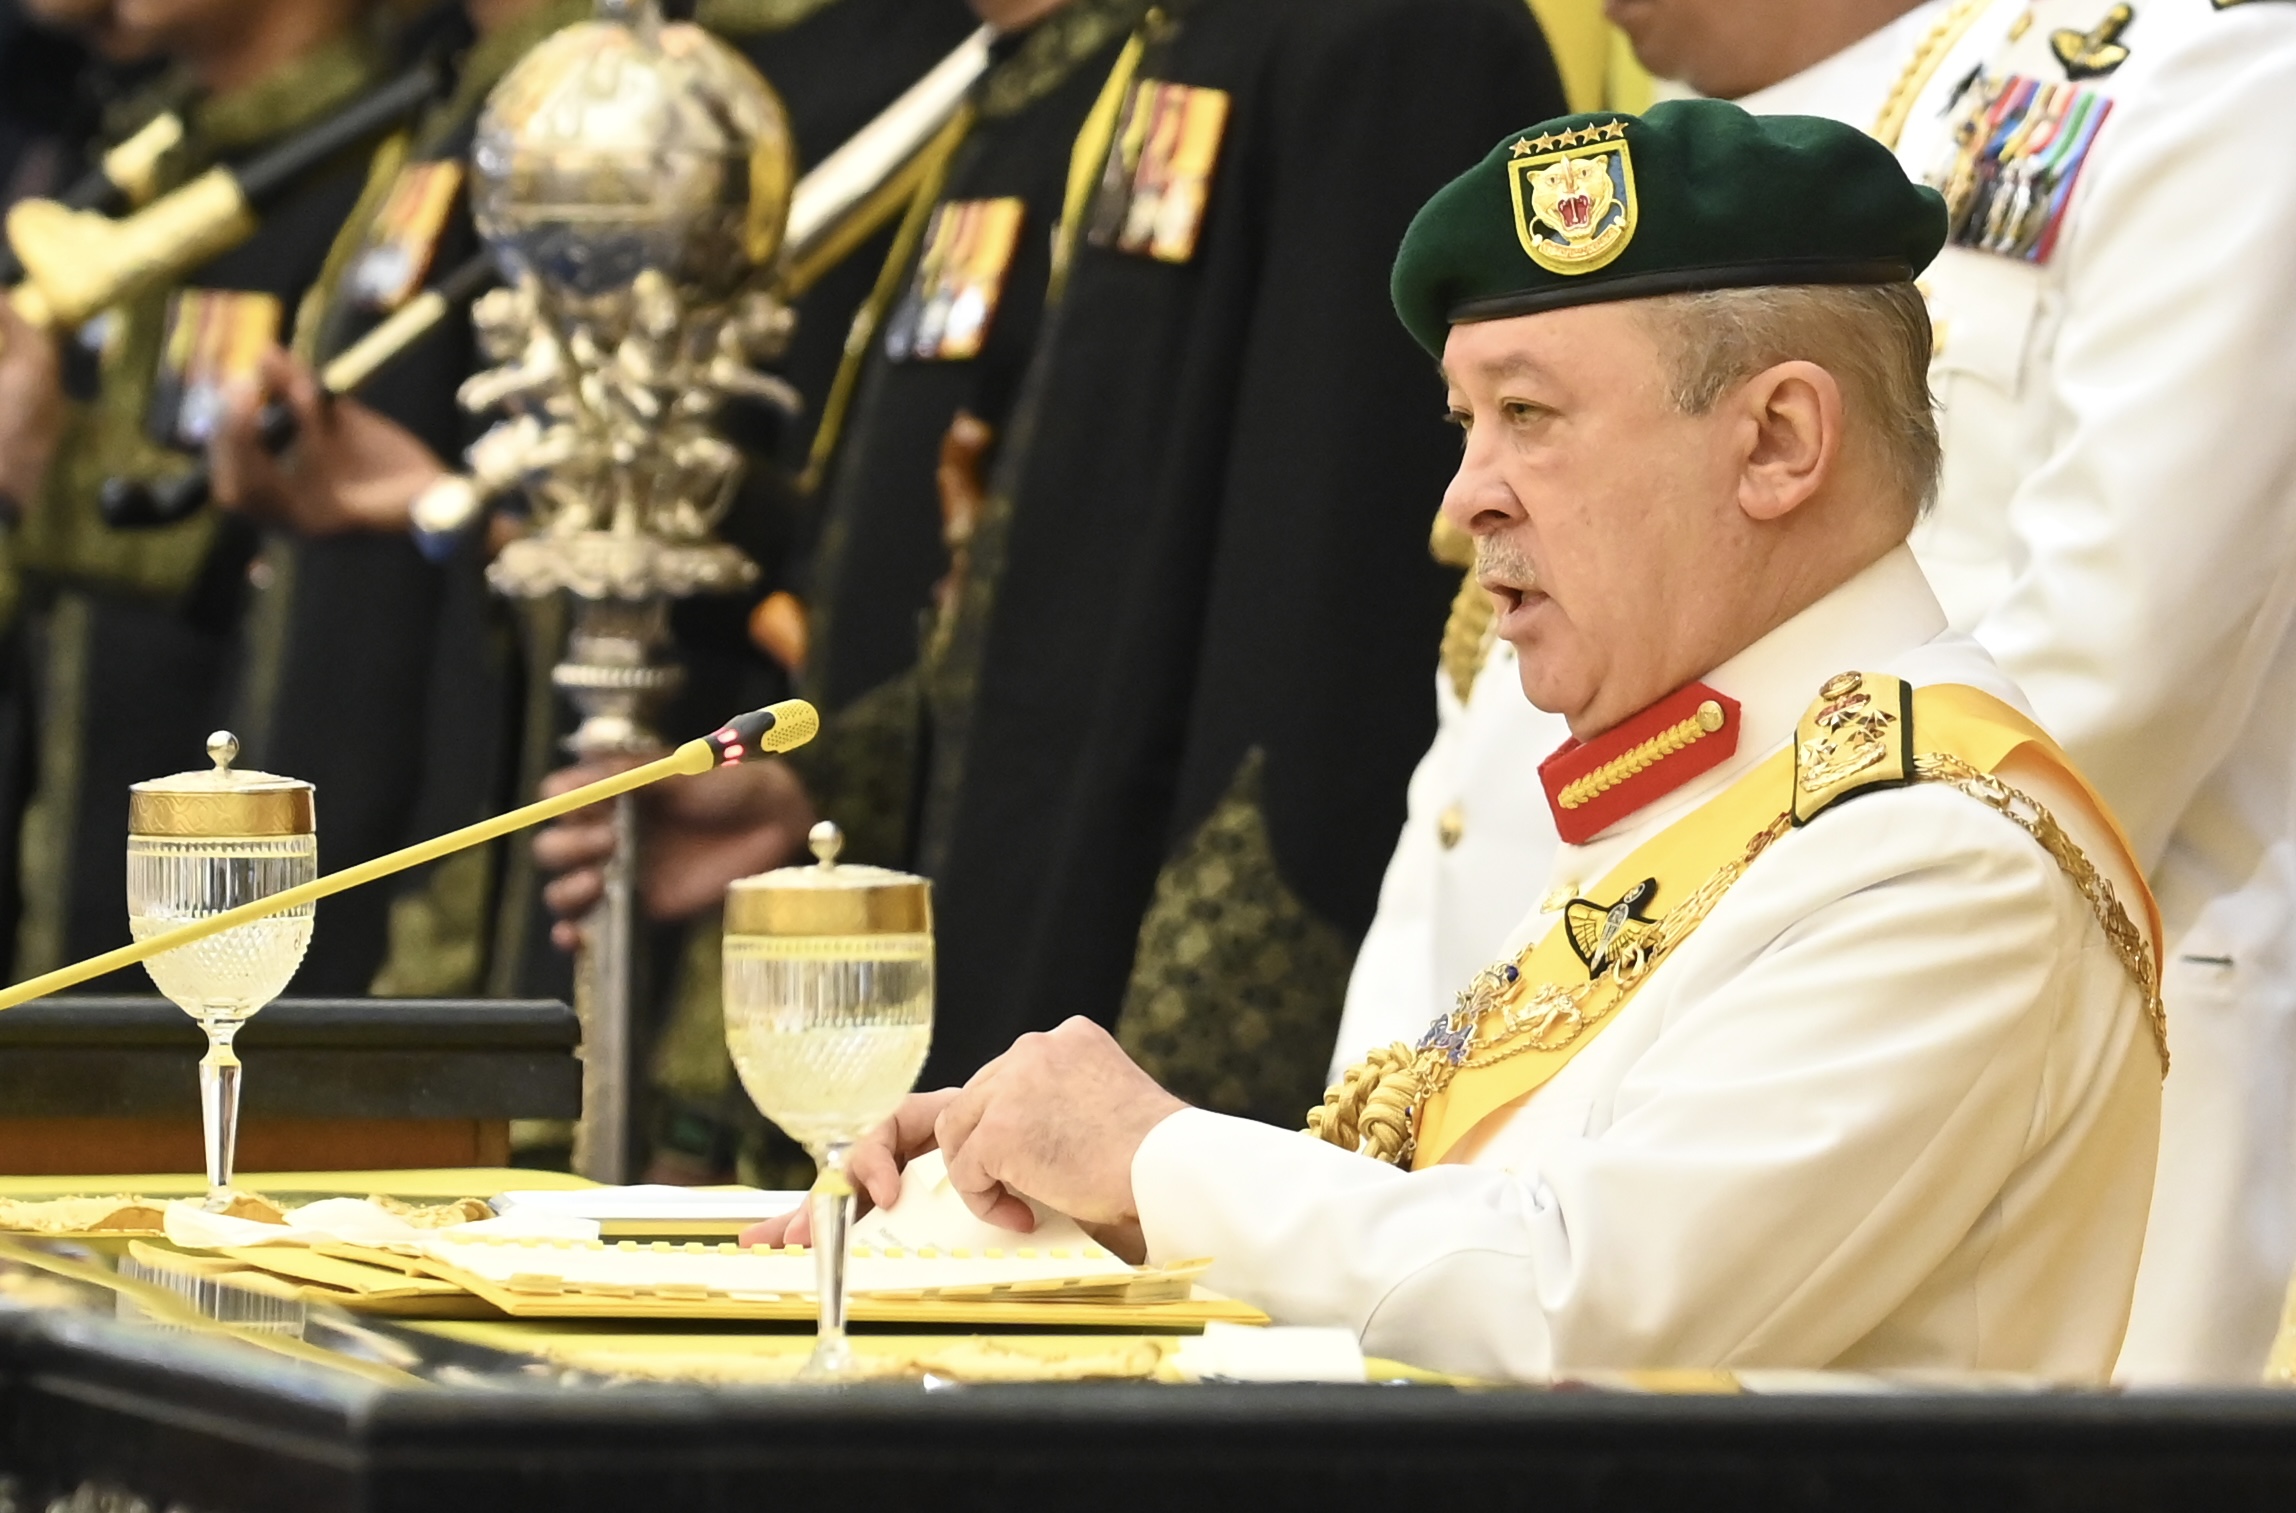 Agong’s call for political calm puts opposition in a tight spot, say analysts